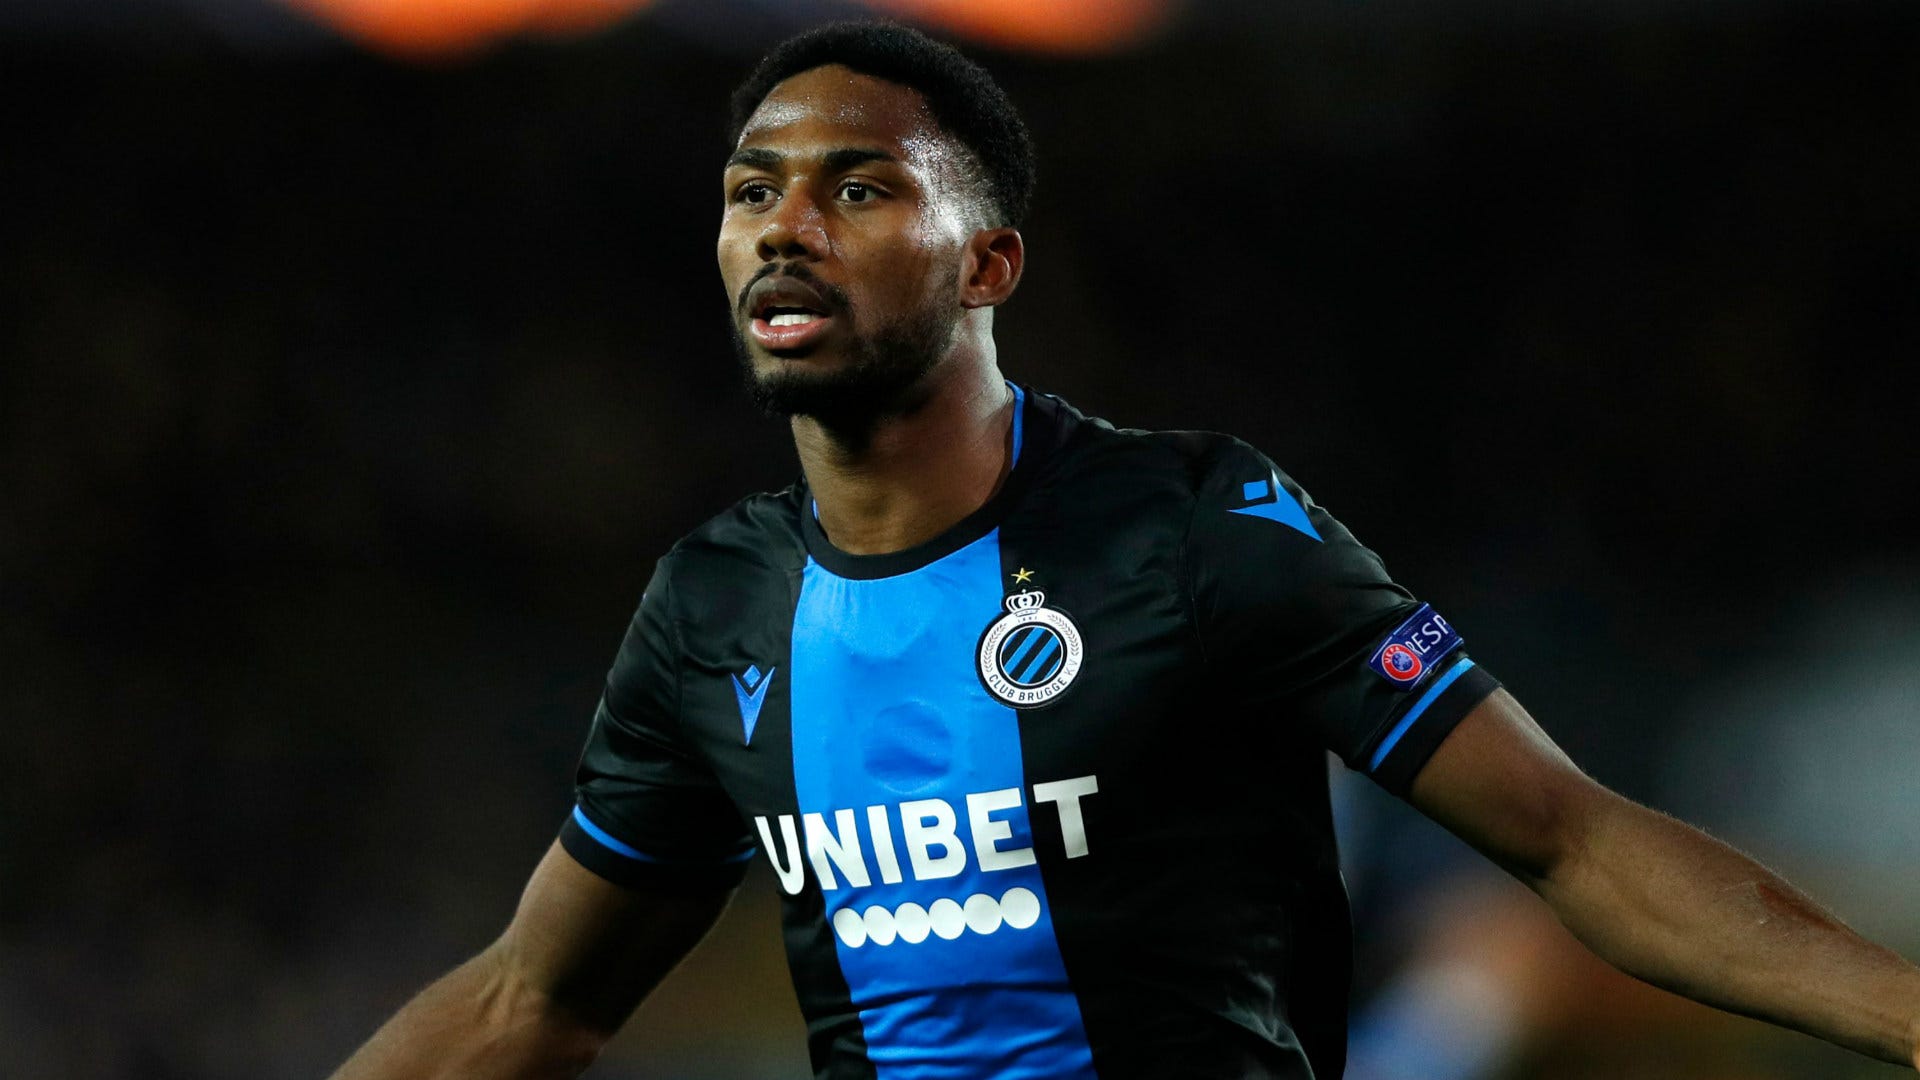 Club Brugge declared champions as Belgian Pro League officially ends 2019-20 season Goal India